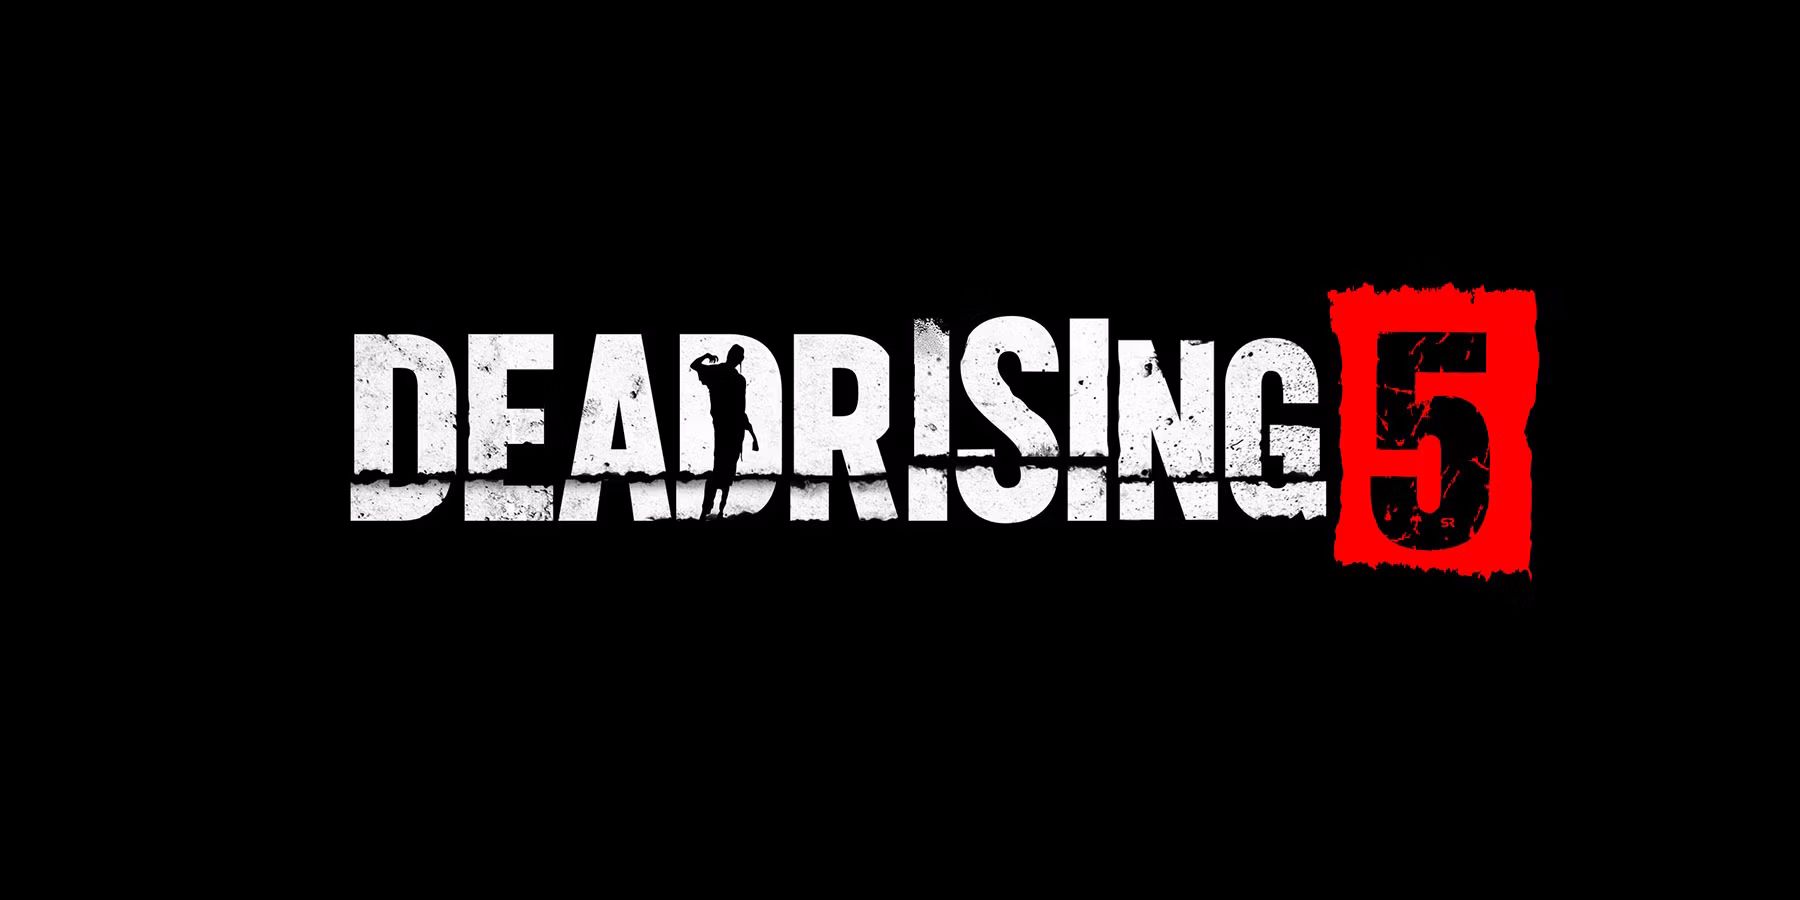 Development Footage From the Cancelled 'Dead Rising 5' Appears Online  [Watch] - Bloody Disgusting